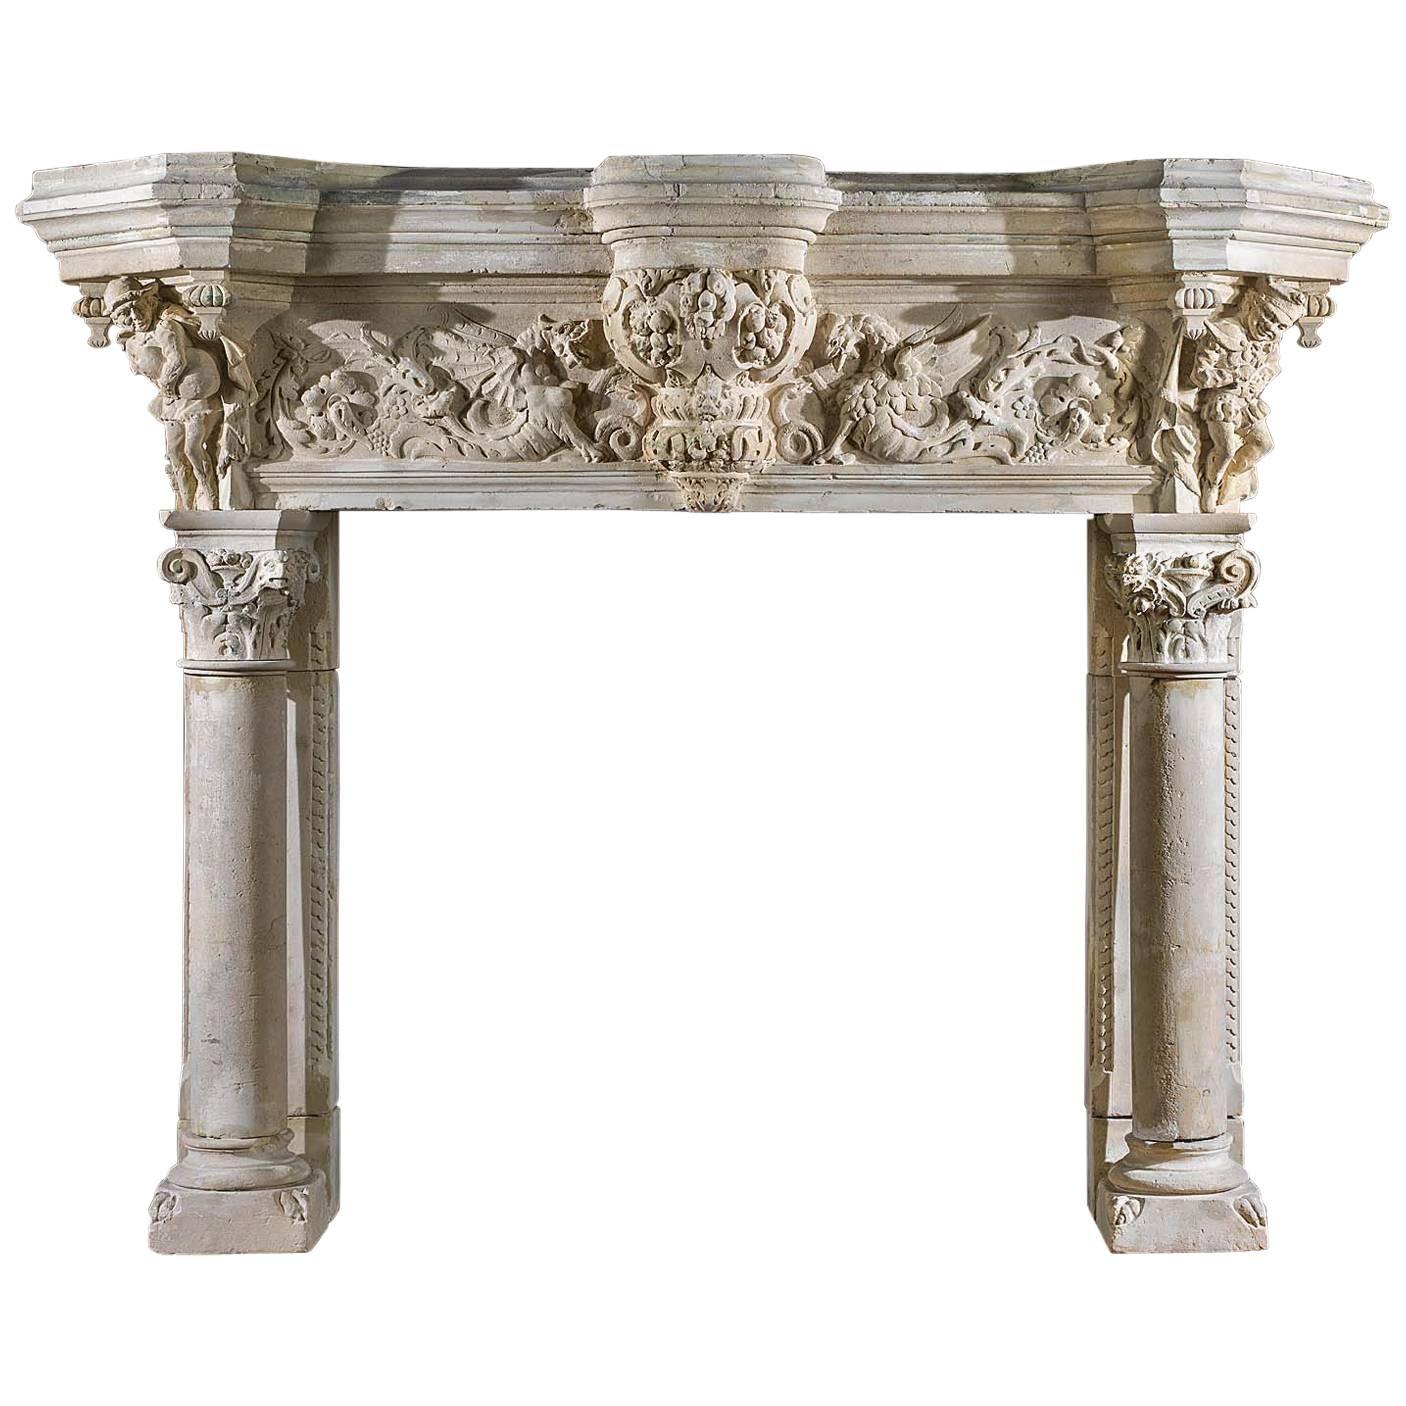 Monumental French Renaissance Style Antique Fireplace